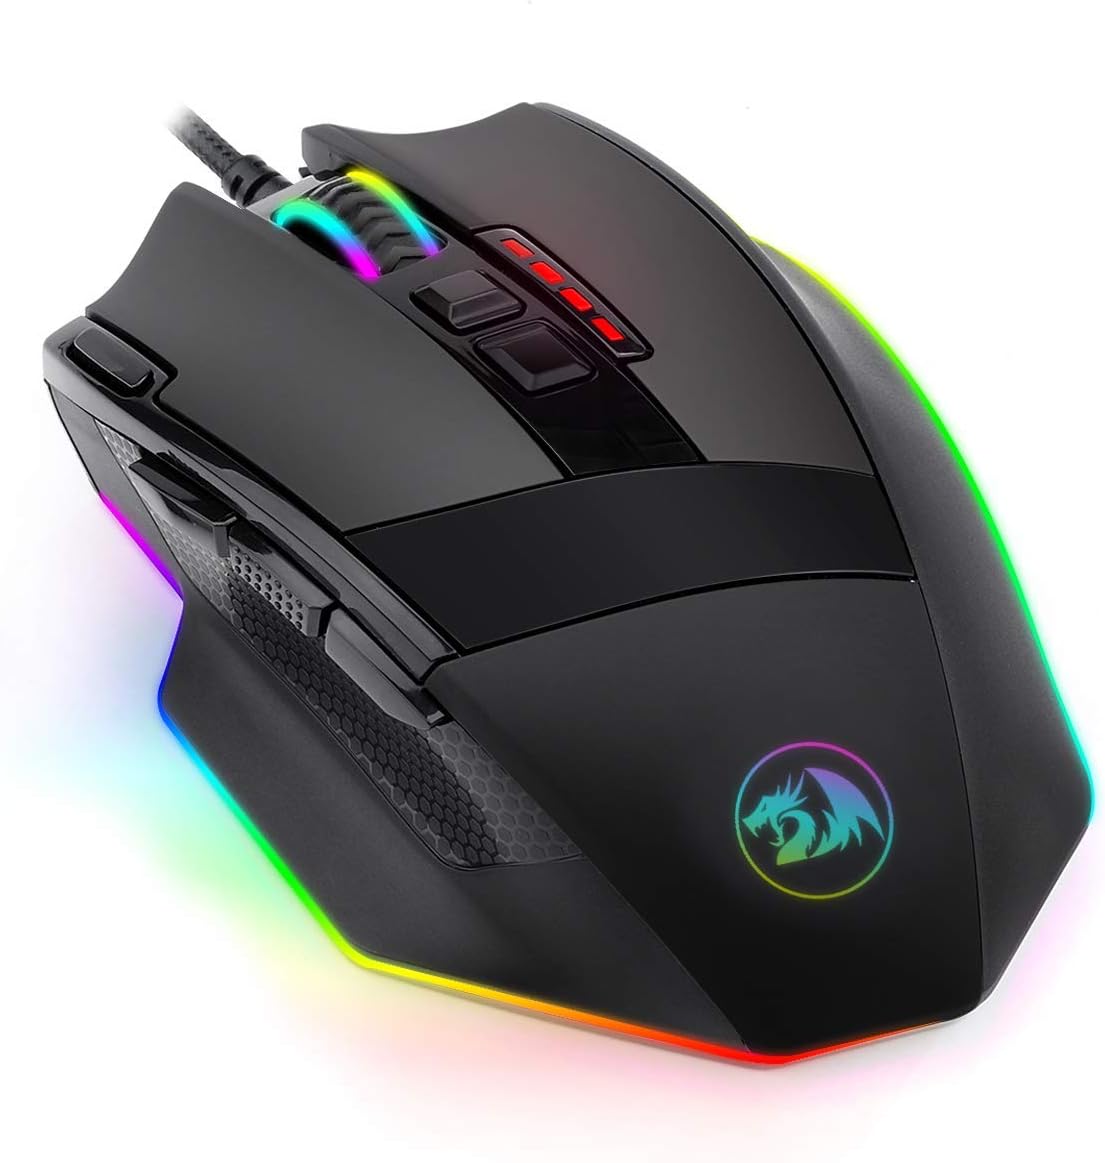 Computer mouse with a red X symbol